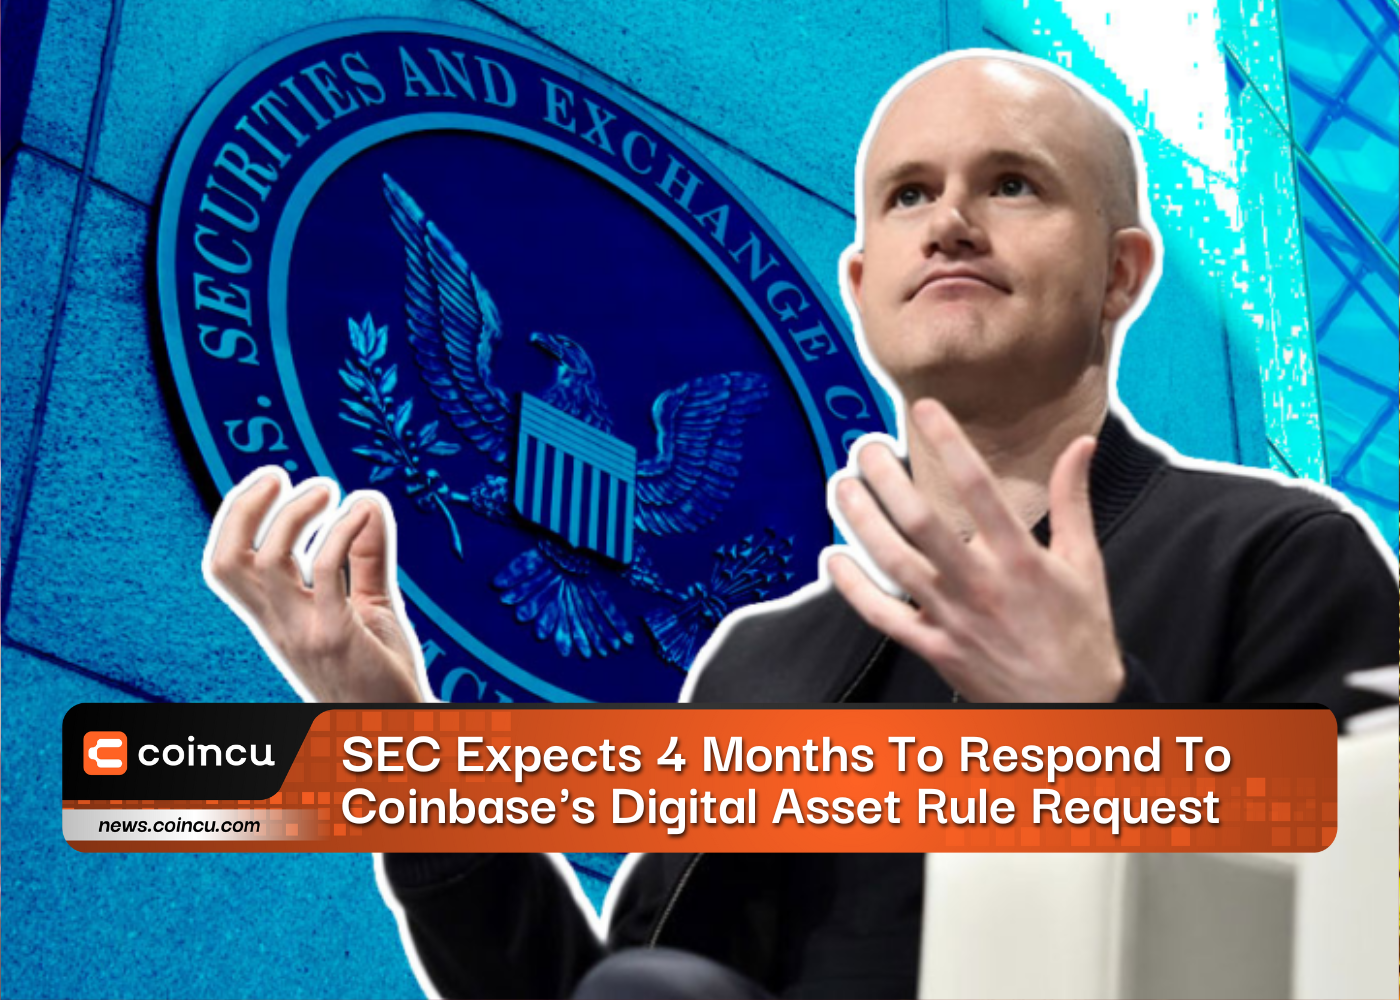 SEC Expects 4 Months To Respond To Coinbase's Digital Asset Rule Request